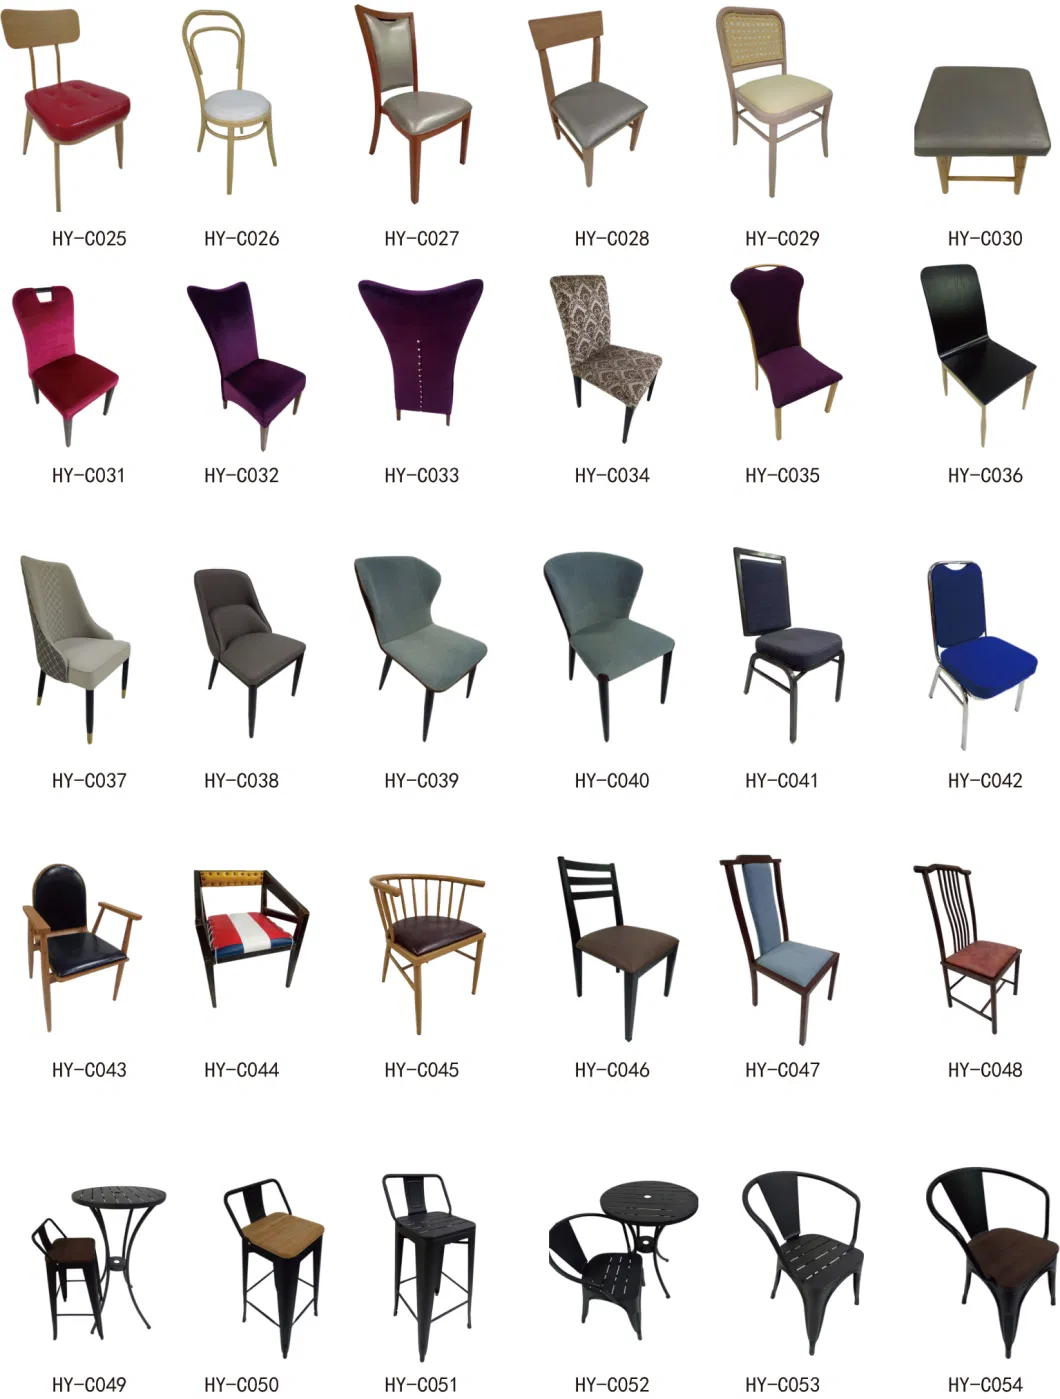 Modern Classic Furniture Styling Chair Back Decoration Leaf Chairs Metal Classic Banquet Chairs for Wedding Events Dining Chair Made in China